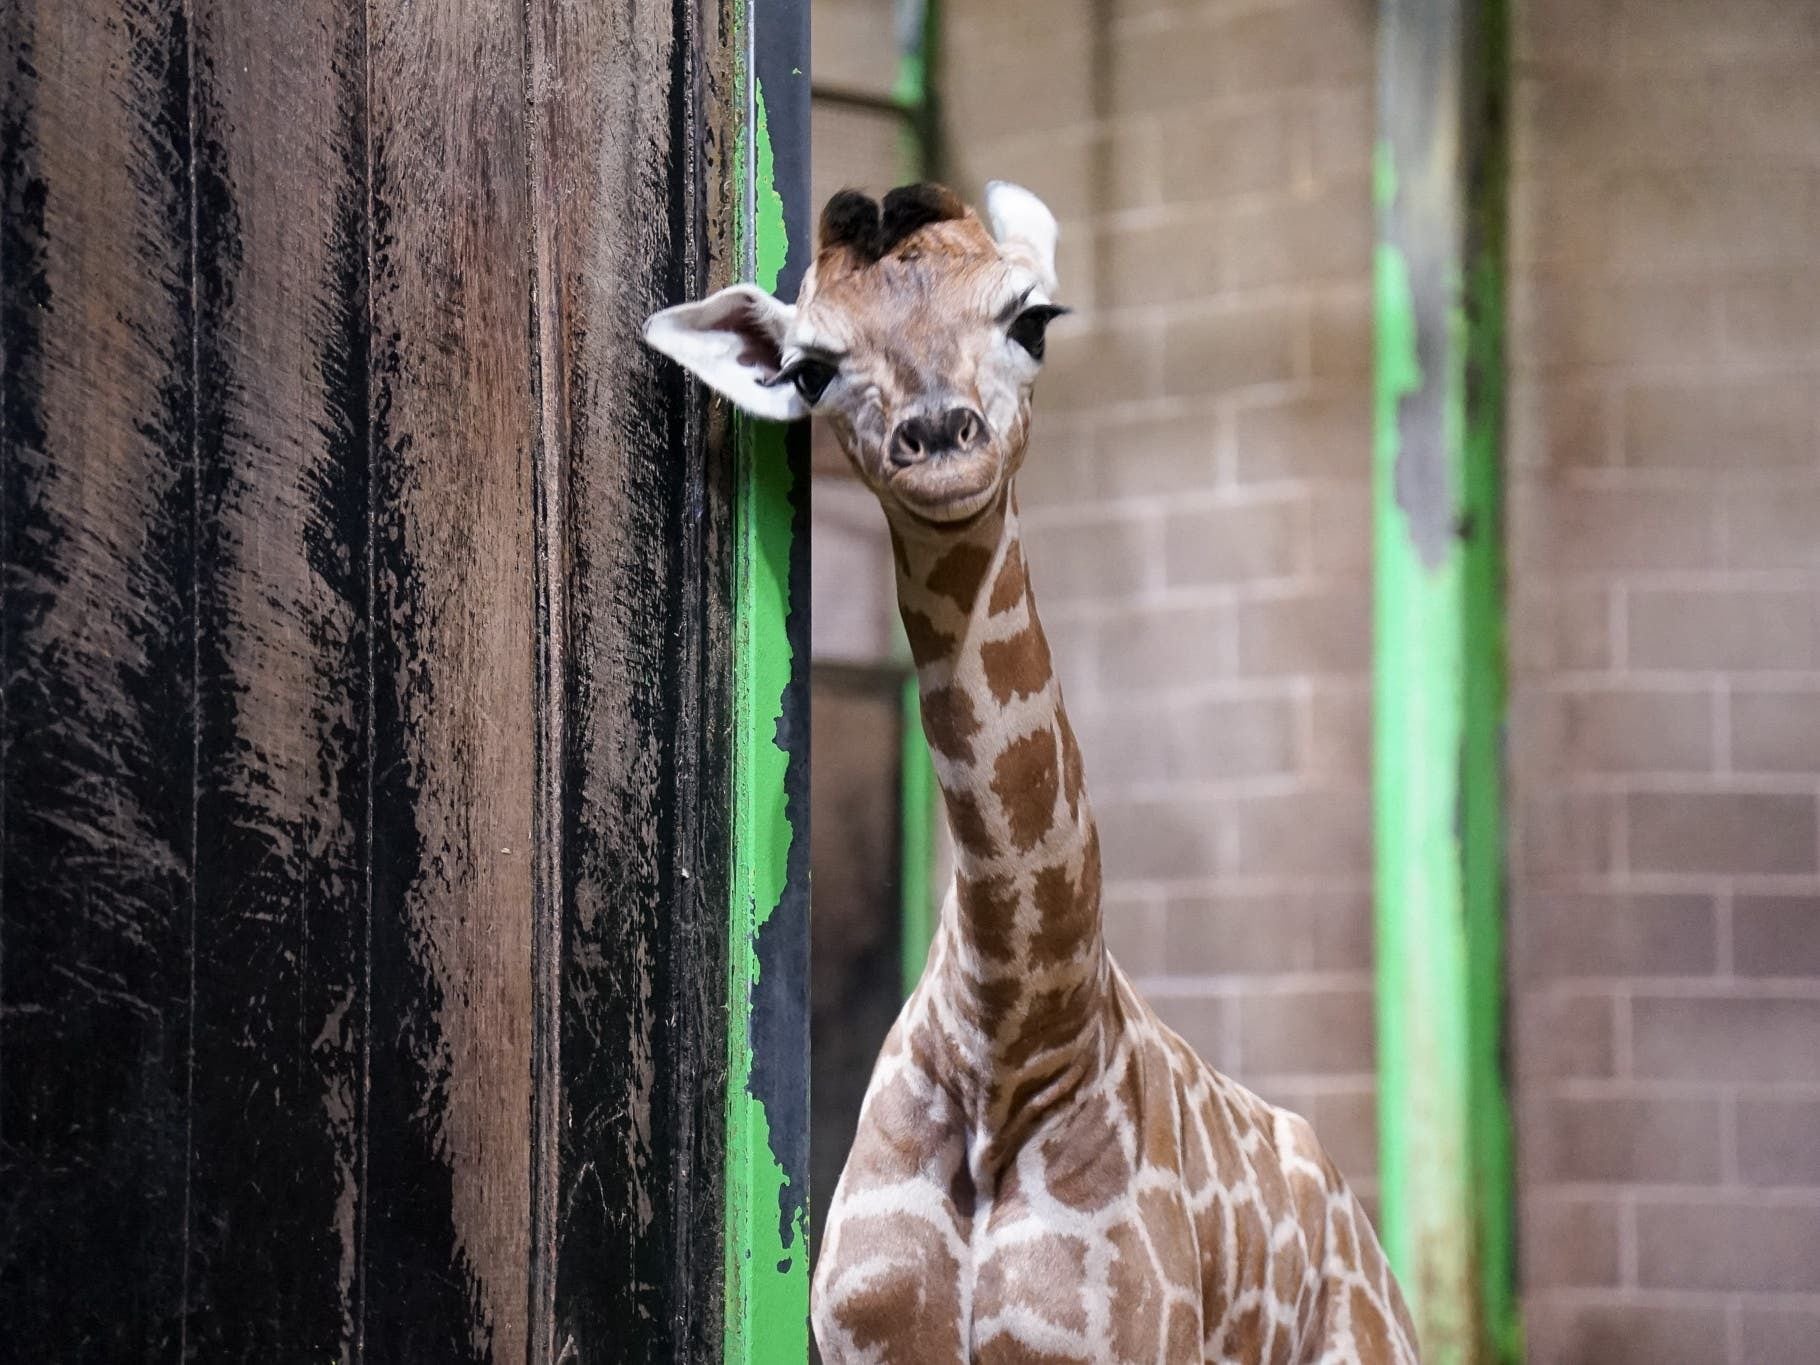 Public asked to help name zoo’s new baby giraffe